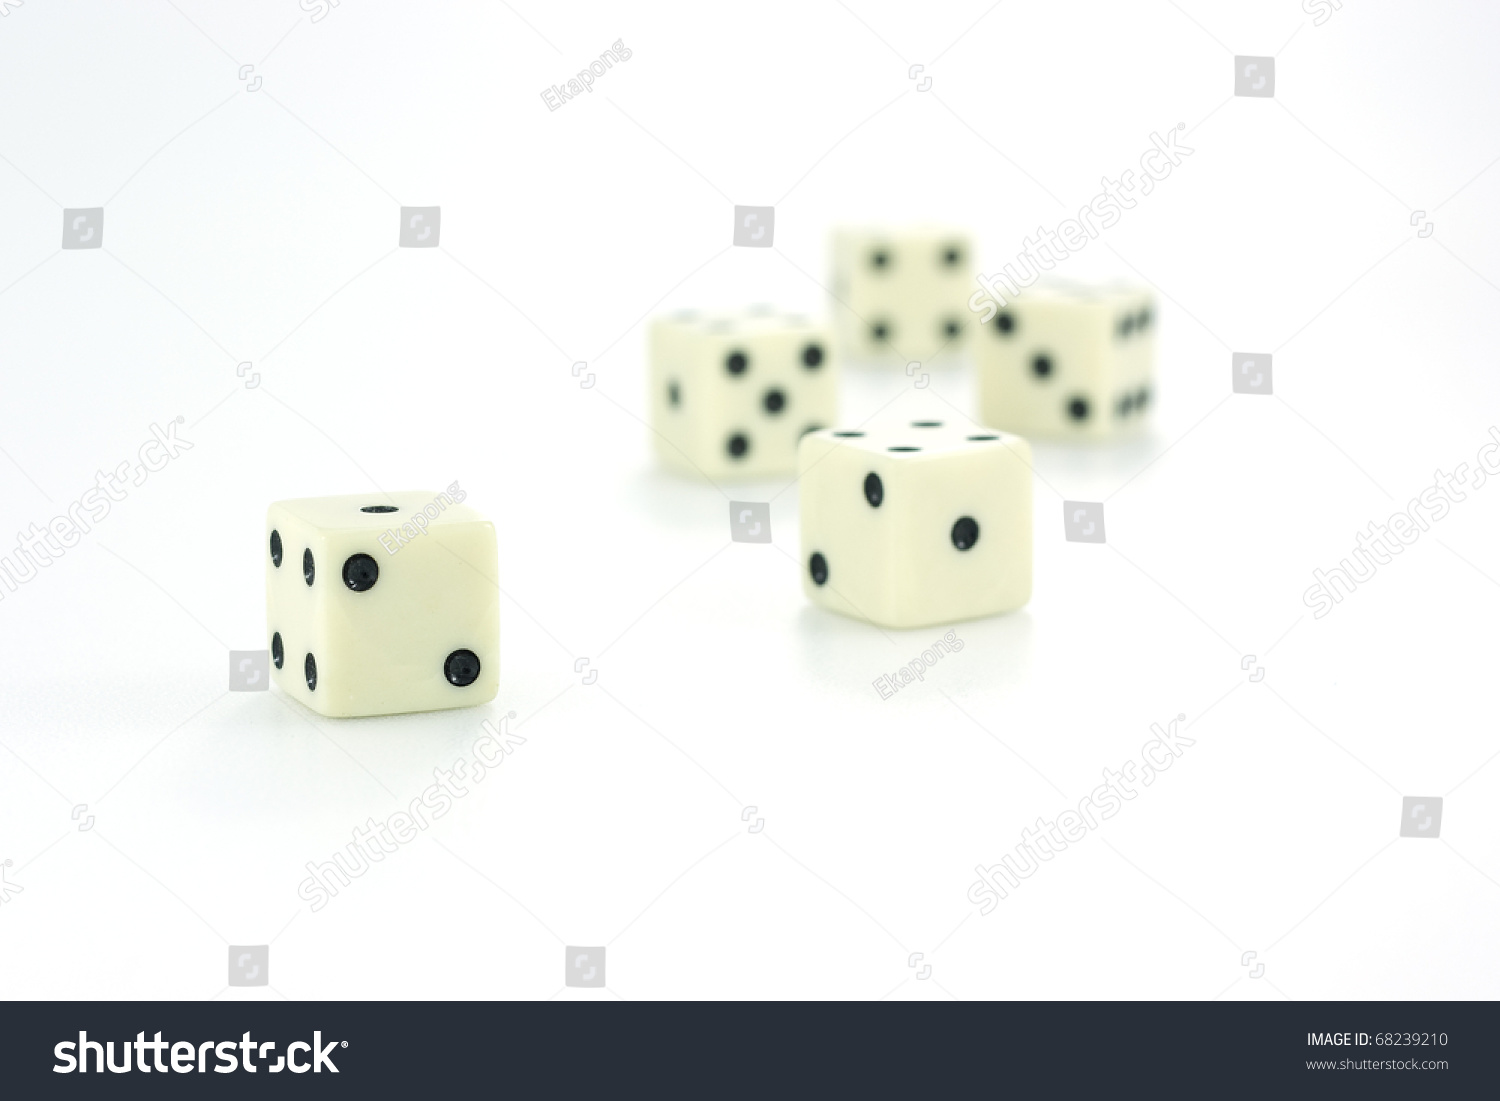 Playing dice #68239210